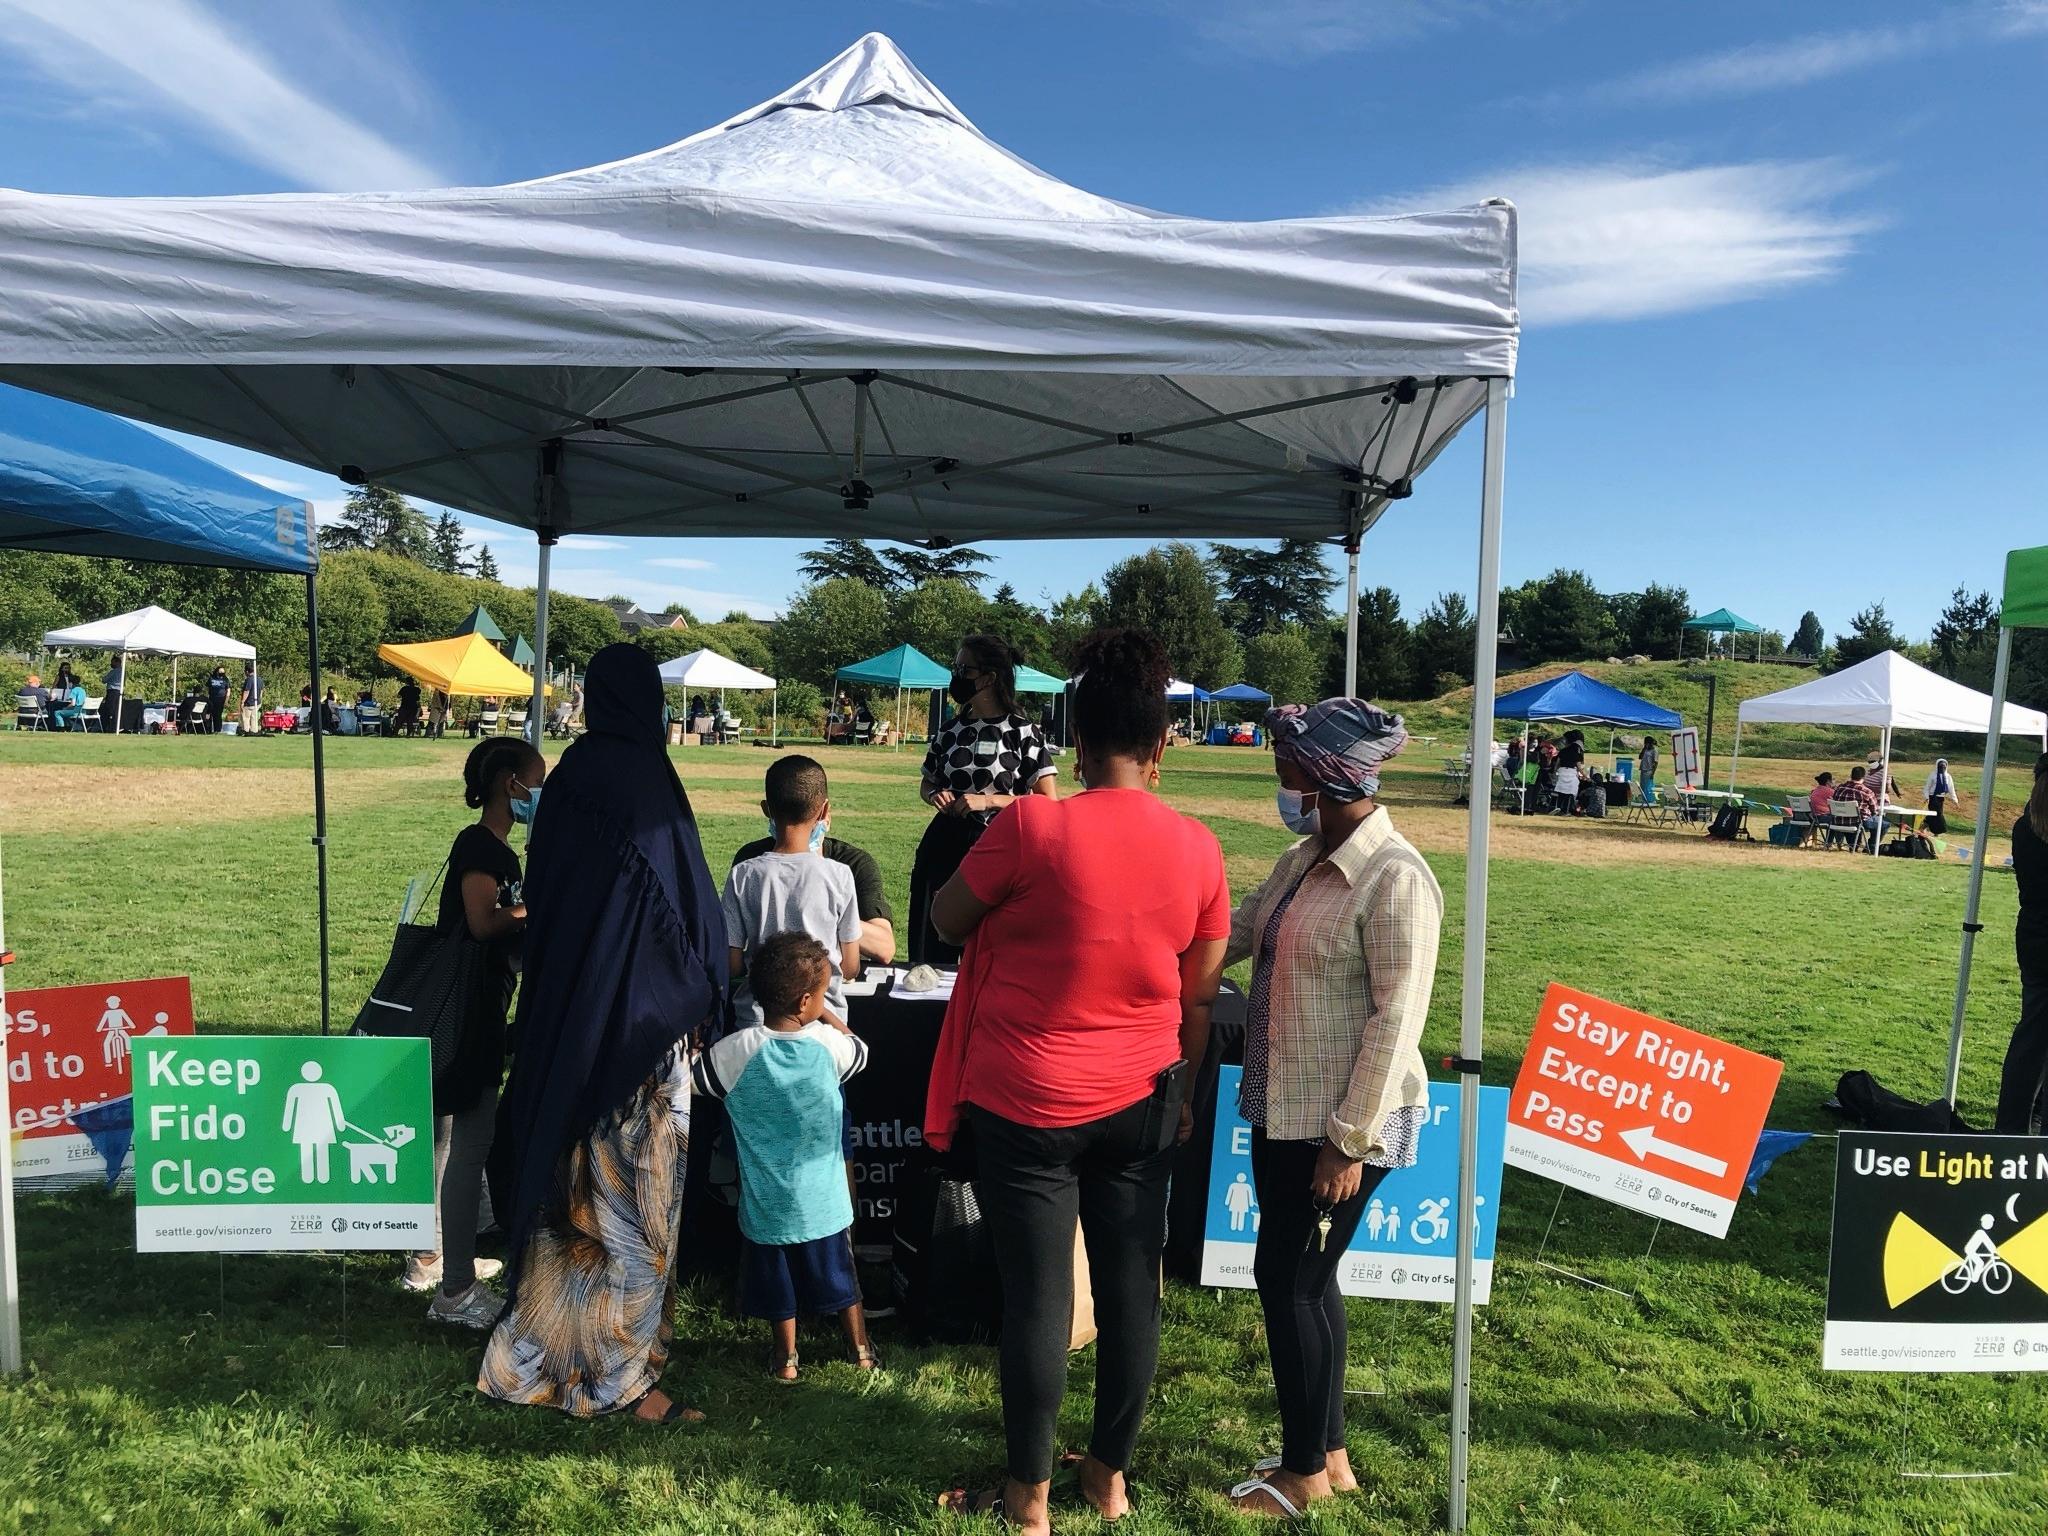 Community members visit an outreach booth in the High Point neighborhood during outreach in summer 2021. Several community members, adults and kids, are visible speaking with the project team on a large grass field, with blue sky and clouds visible in the background. People pictured are gathered under and in front of a white pop-up canopy.